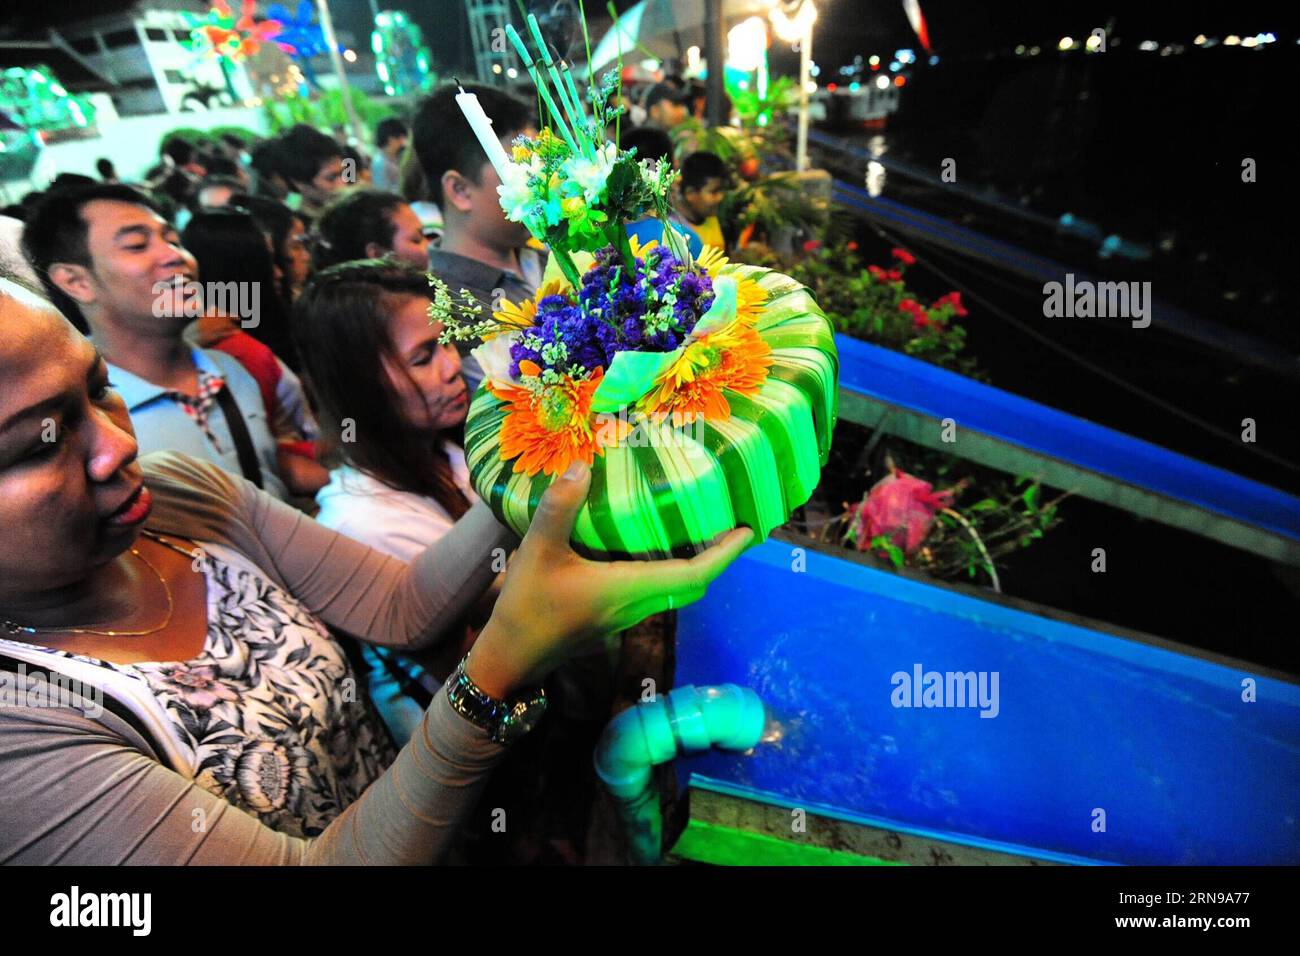 (151126) -- BANGKOK, Nov. 25, 2015 -- People pray before casting water lanterns into the Chao Phraya River during the Loy Krathong festival in Bangkok, Thailand, Nov. 25, 2015. The festival interprets the close tie between Thai culture and water when people ask water spirits to sail their troubles away in the Krathongs, which are containers originally made of banana leaves with offerings of incense, lotus and small money. ) THAILAND-BANGKOK-LOY KRATHONG FESTIVAL RachenxSageamsak PUBLICATIONxNOTxINxCHN   151126 Bangkok Nov 25 2015 Celebrities Pray Before Casting Water Lanterns into The Chao Phr Stock Photo